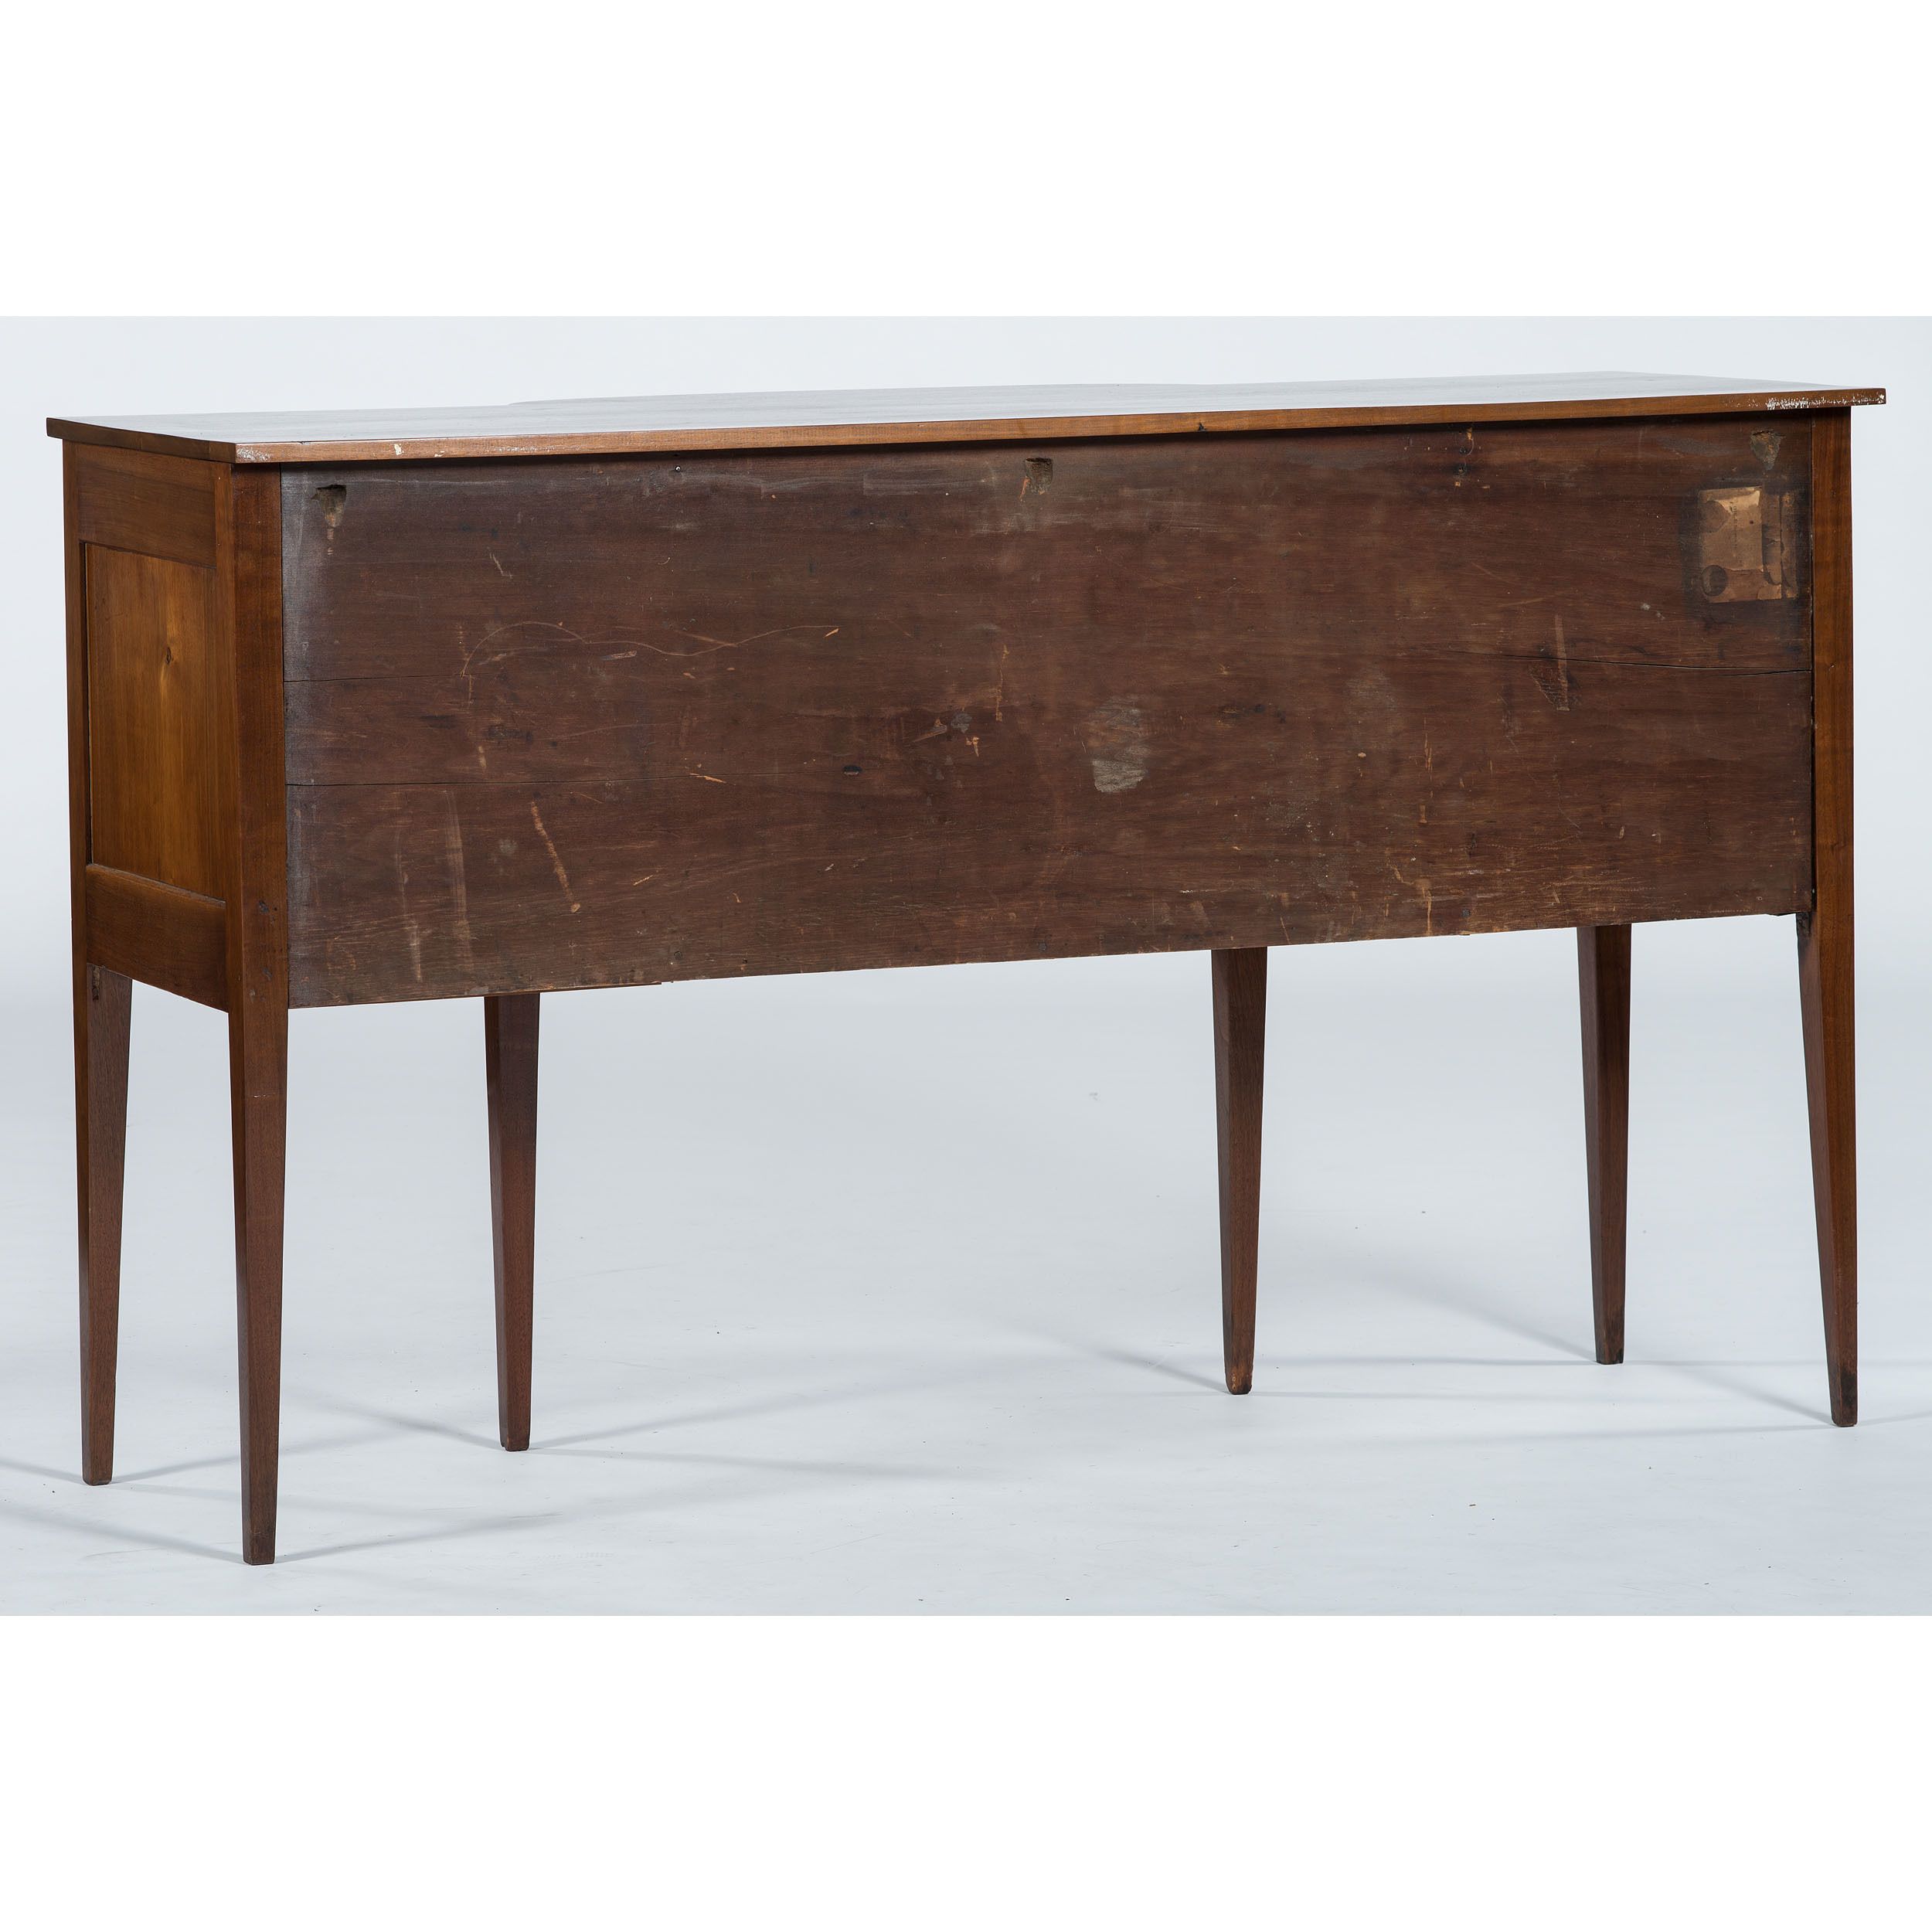 American Hepplewhite Sideboard | Cowan's Auction House: The Midwest's With Cleveland Server (View 4 of 22)